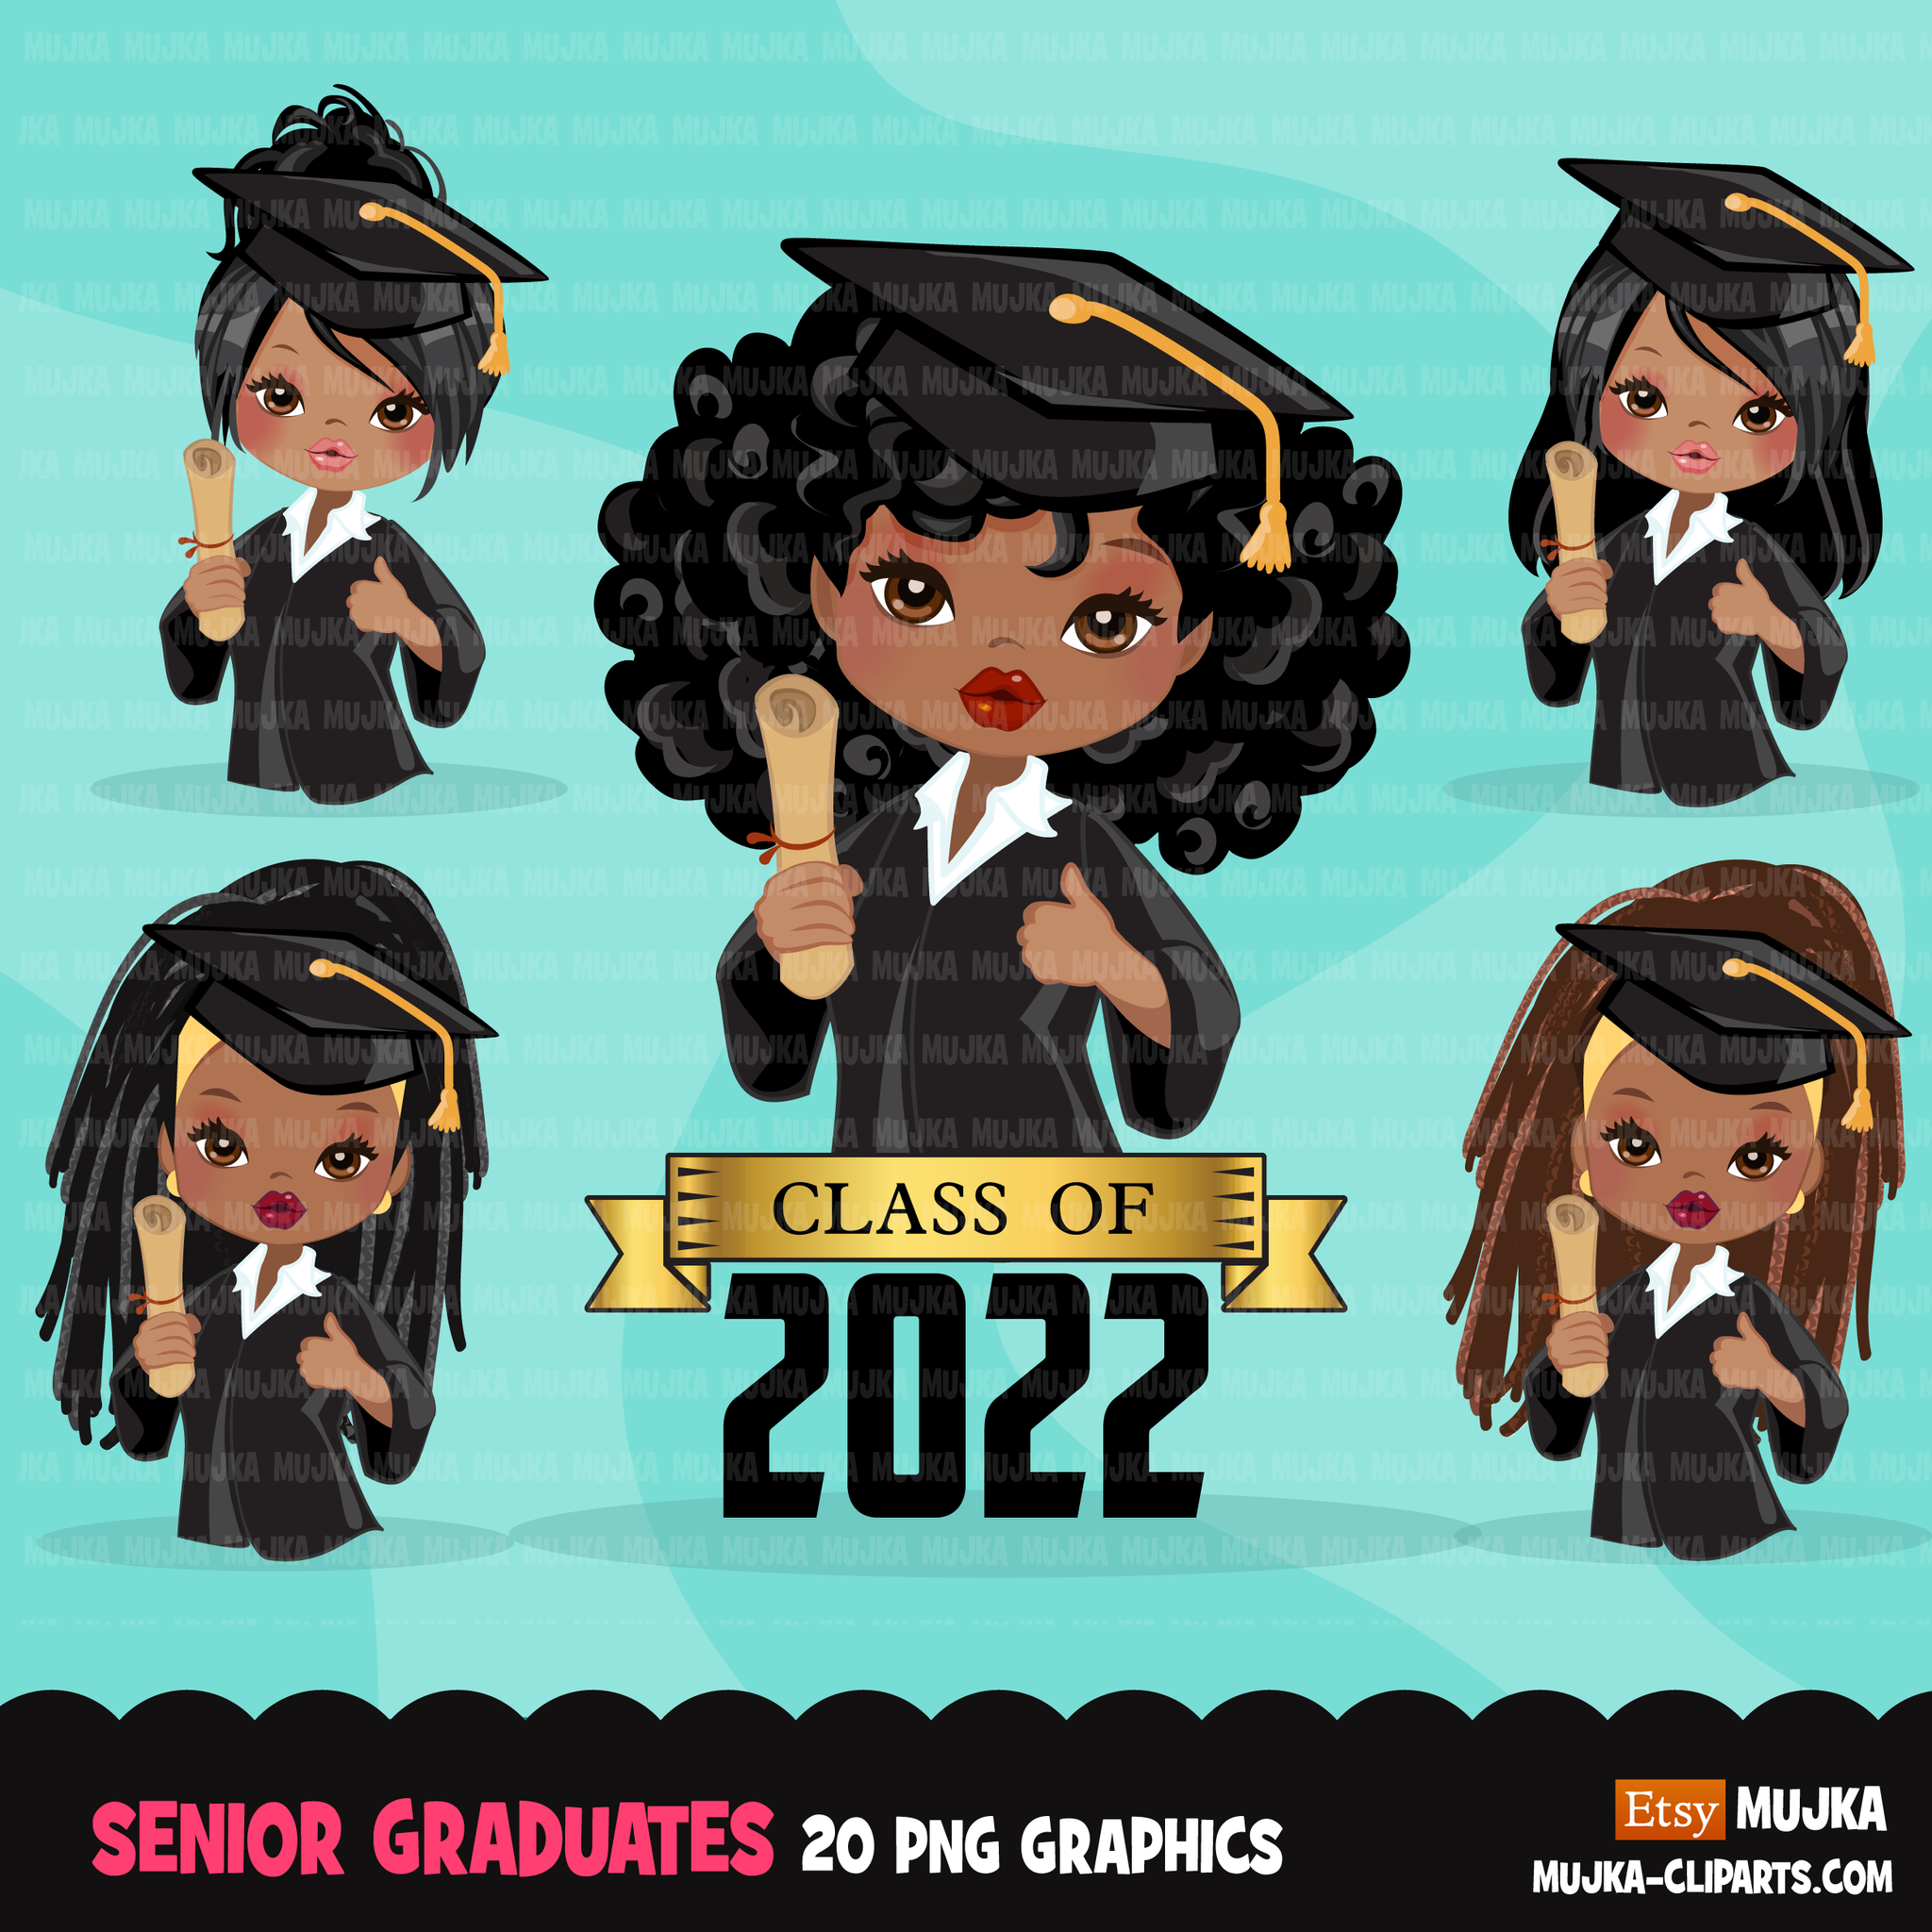 Graduation Clipart, senior black graduate girls with cape and scroll, school, student class of 2022 gold banner graphics, PNG clip art